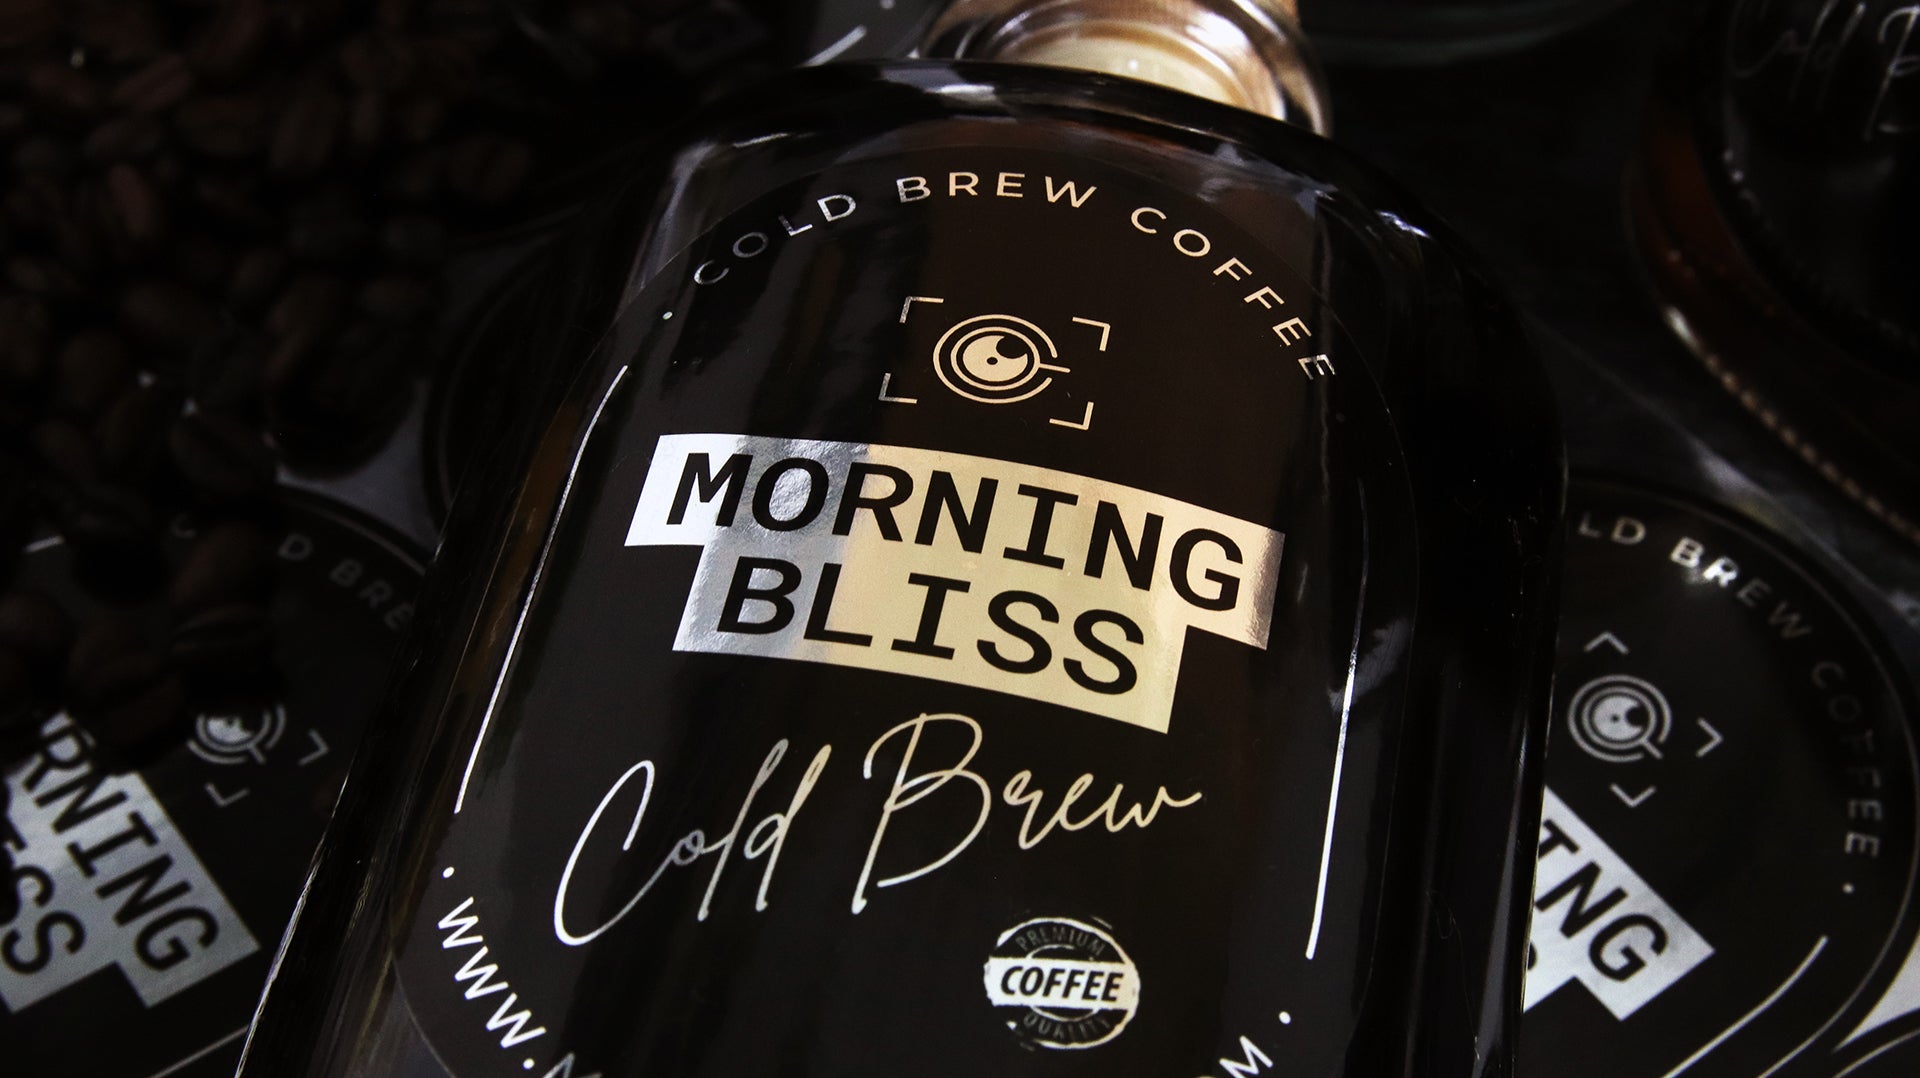 Oval mirror silver bottle label with morning bliss design applied to a glass bottle with cold brew coffee